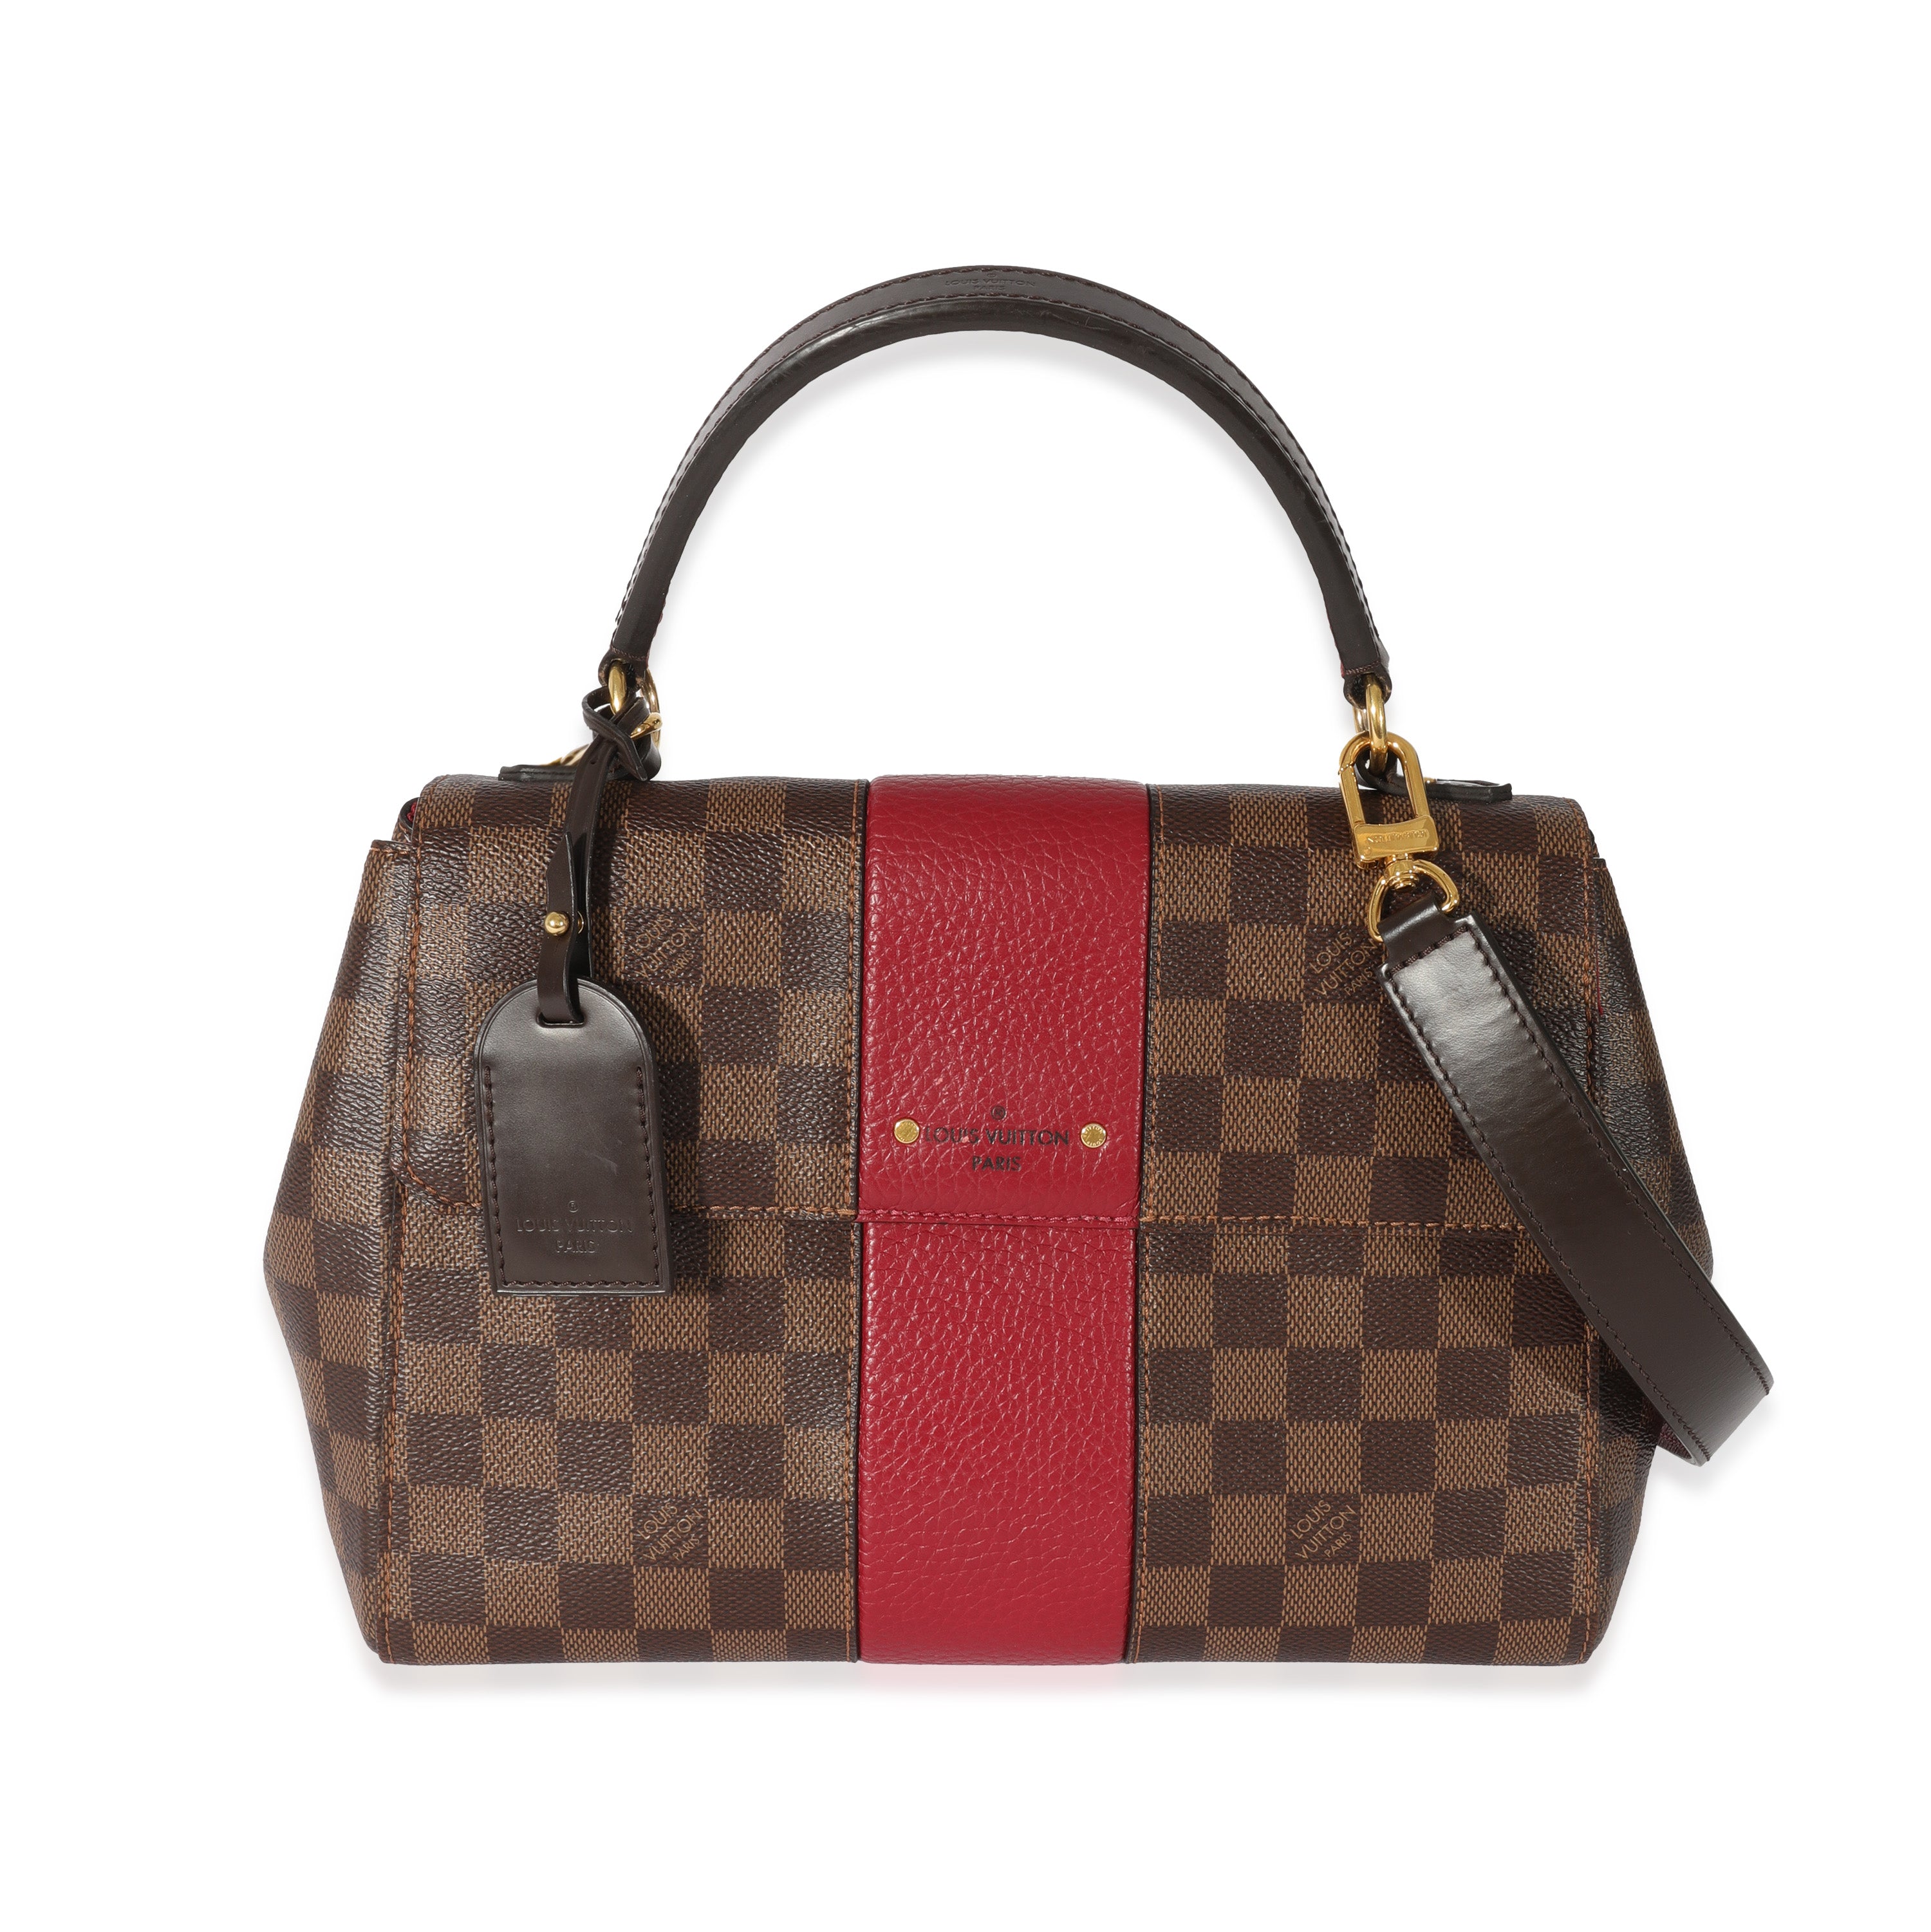 When it comes come to damier ebene.. what do we consider it ? Loud